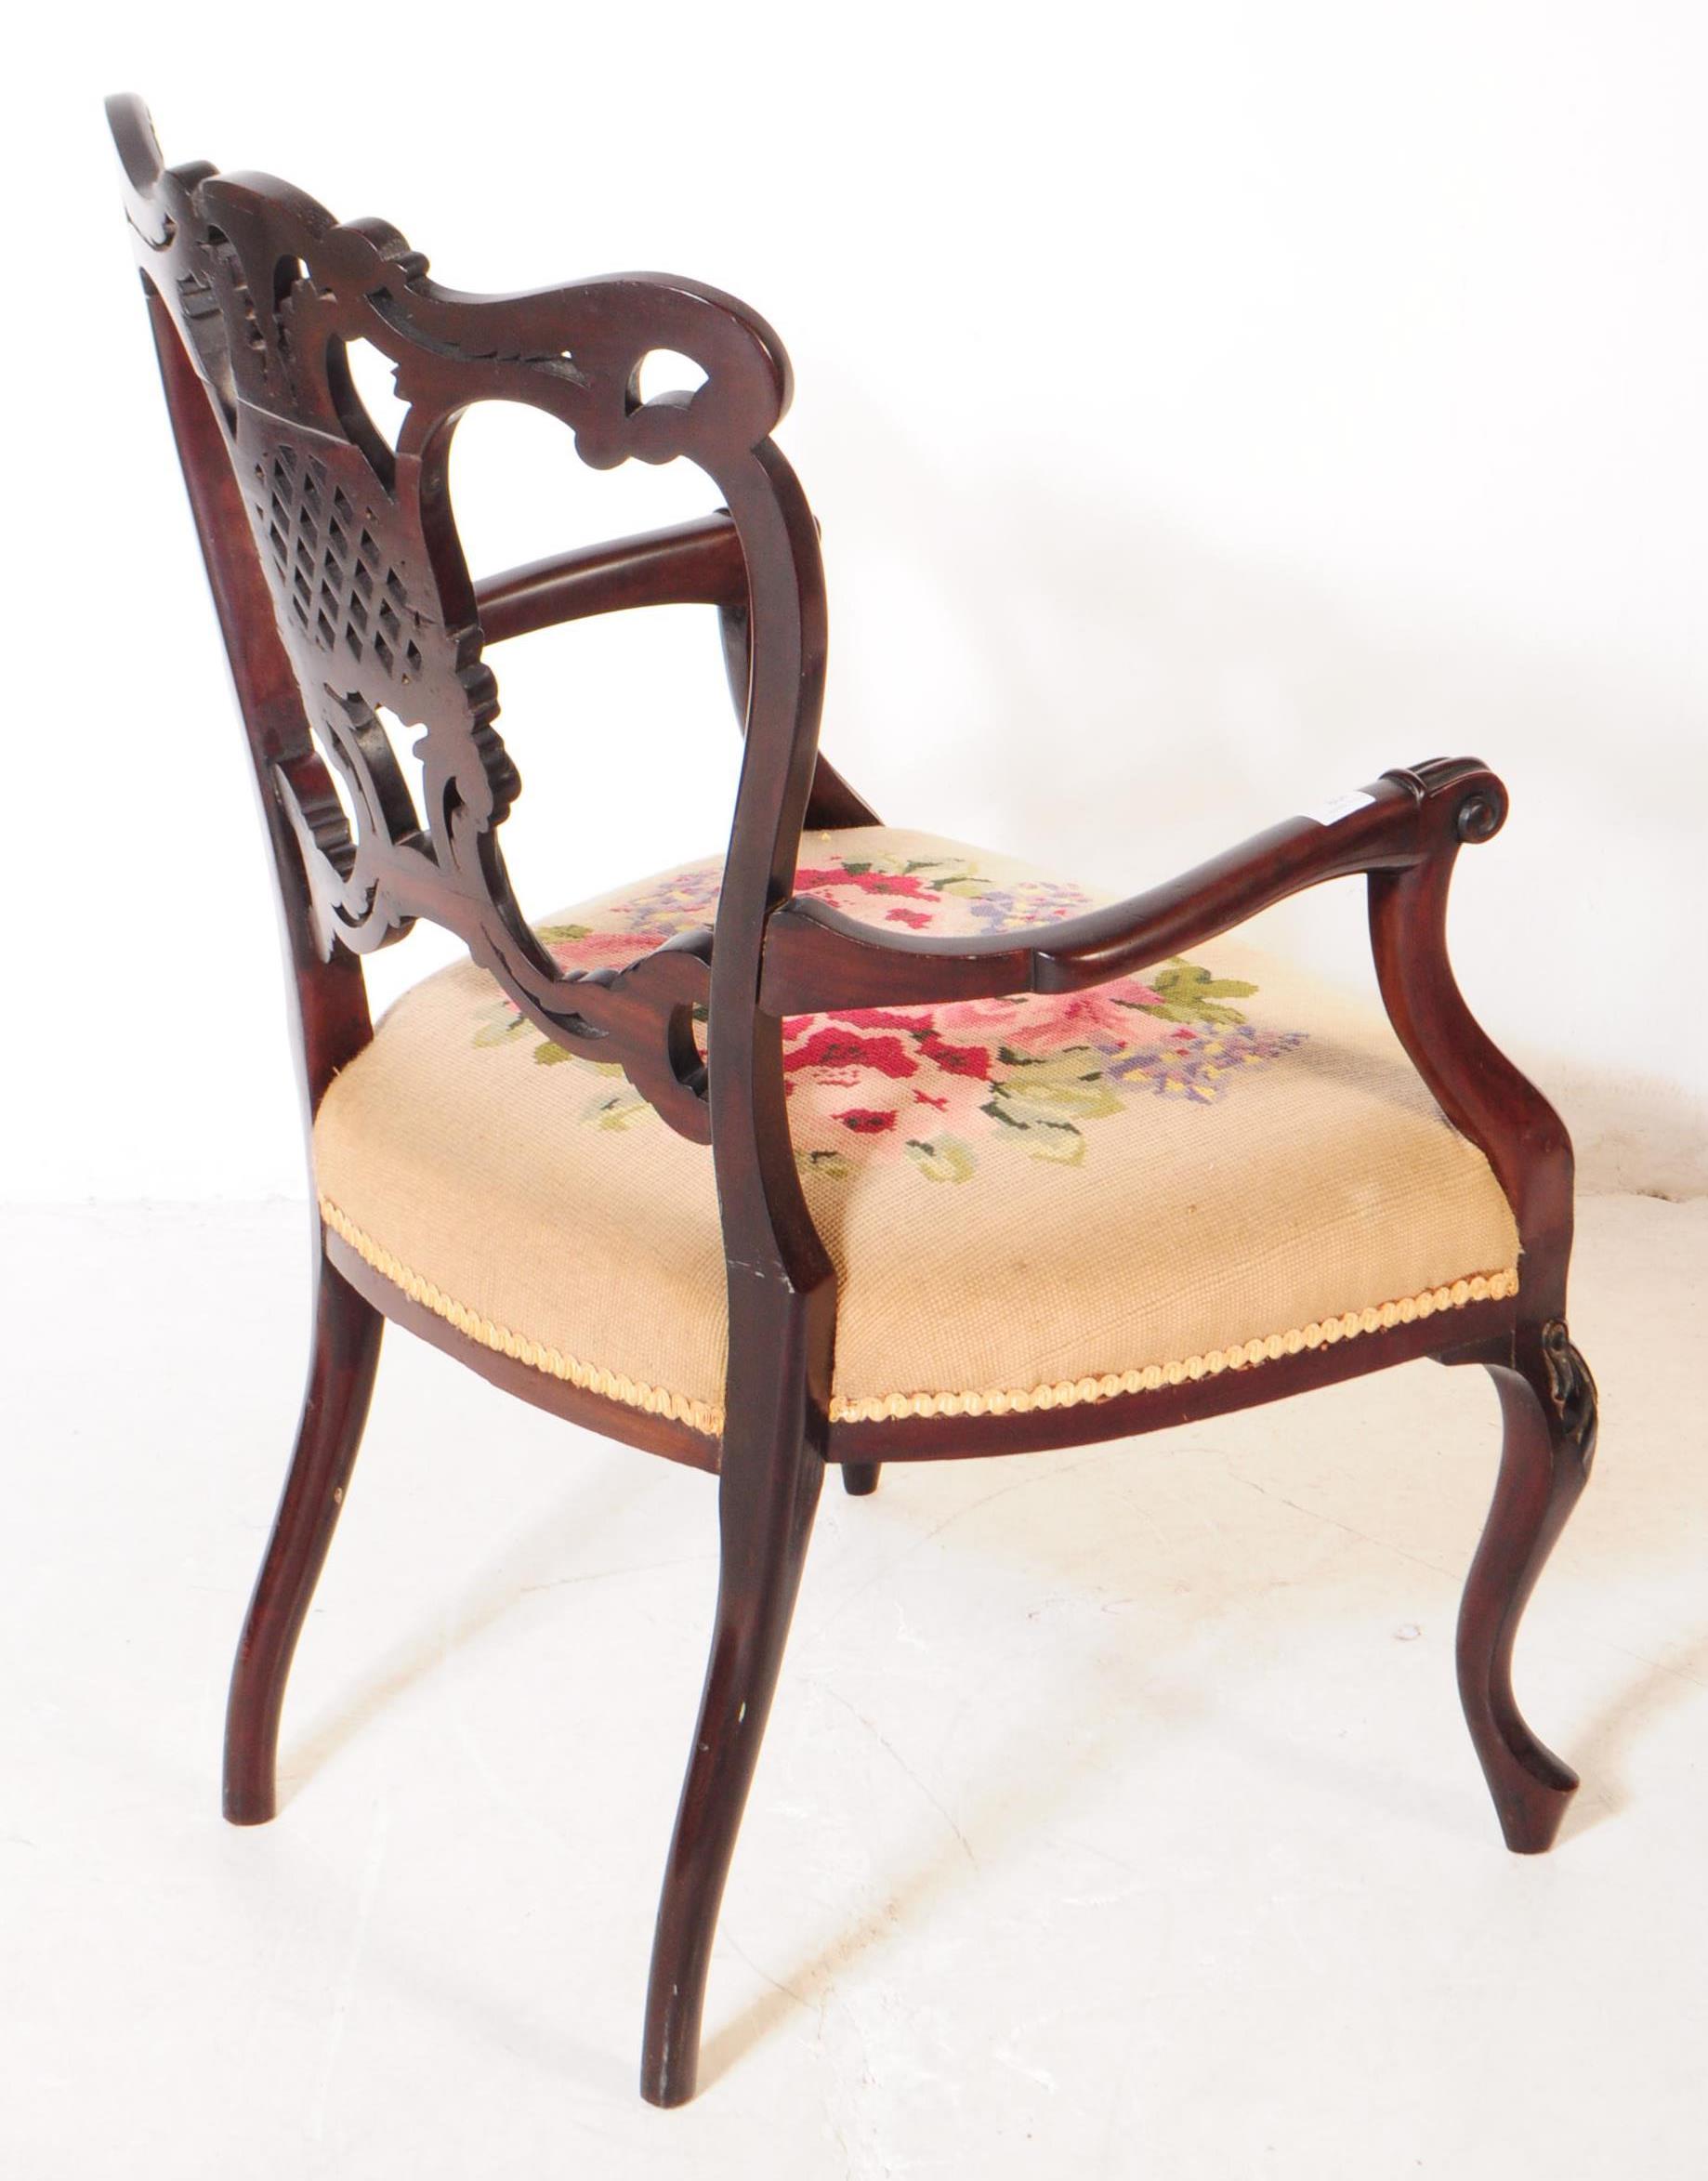 EDWARDIAN CHIPPENDALE REVIVAL BEDROOM ARMCHAIR - Image 4 of 5